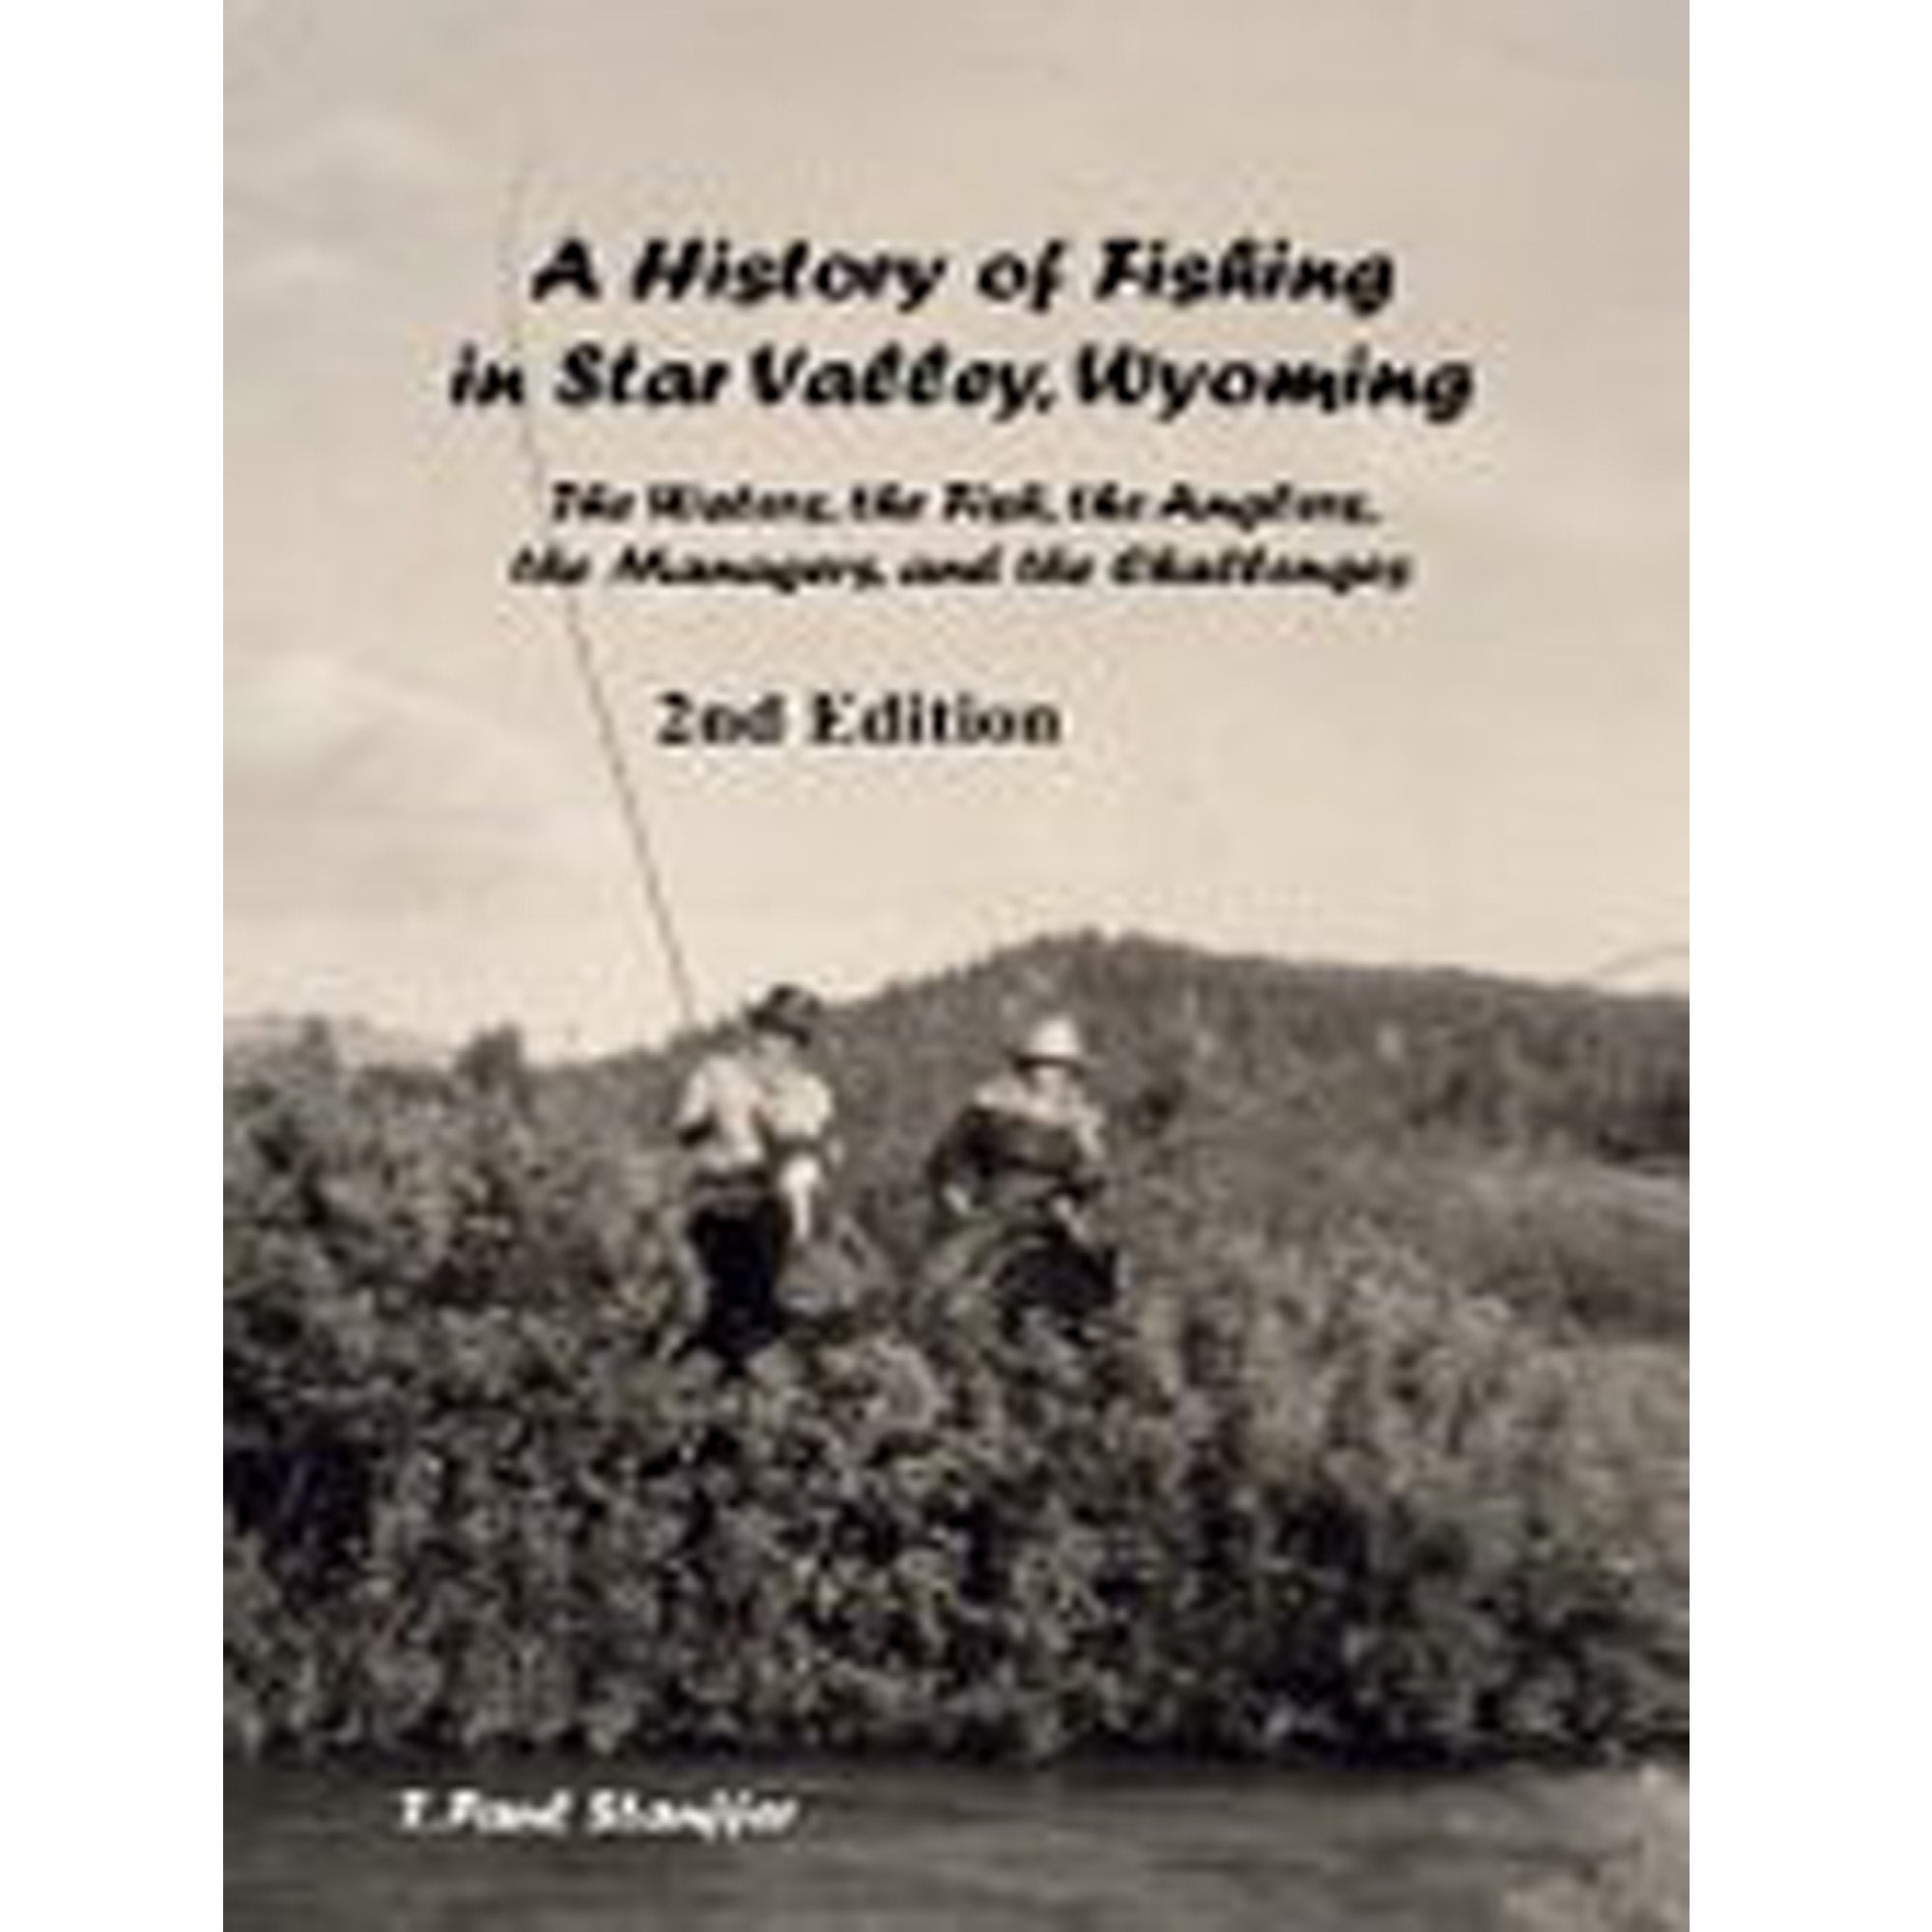 A History of Fishing in Star Valley, Wyoming 2nd Edition: The Waters, the Fish, the Anglers, the Managers, and the Challenges [Book]